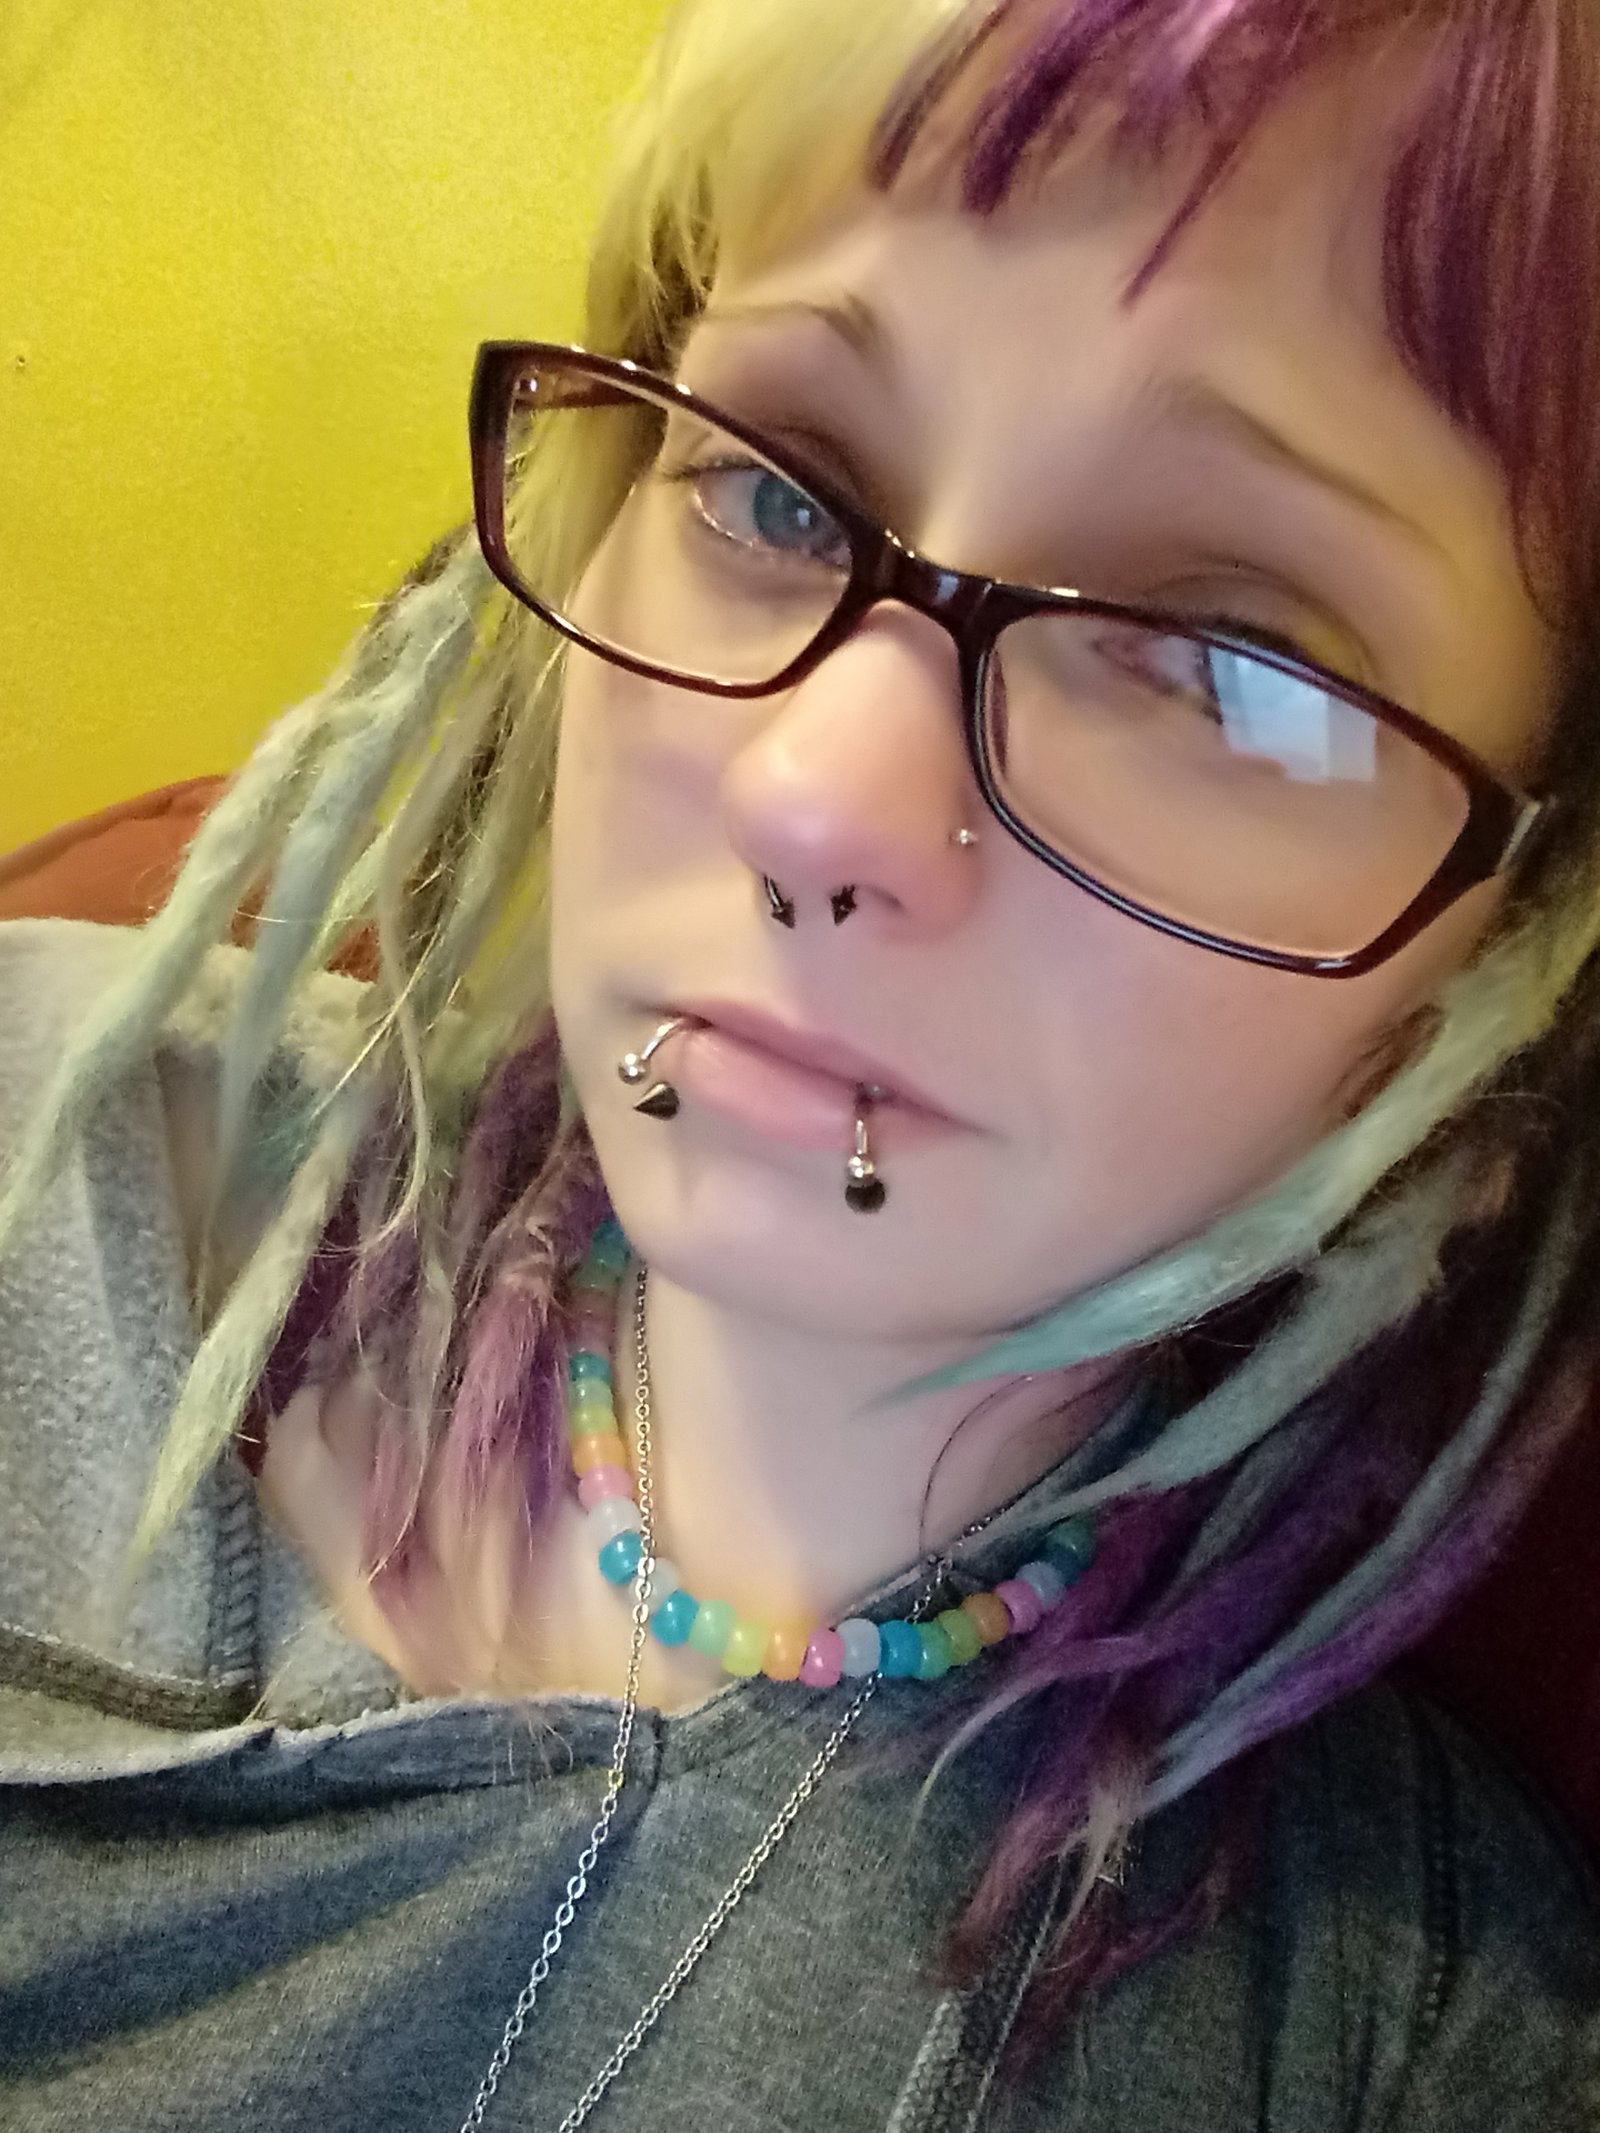 Watch the Photo by Princesskitten with the username @Princesskitten, who is a star user, posted on April 24, 2019 and the text says 'I need someone to fuck me soooo good that I forget that I am upset!'